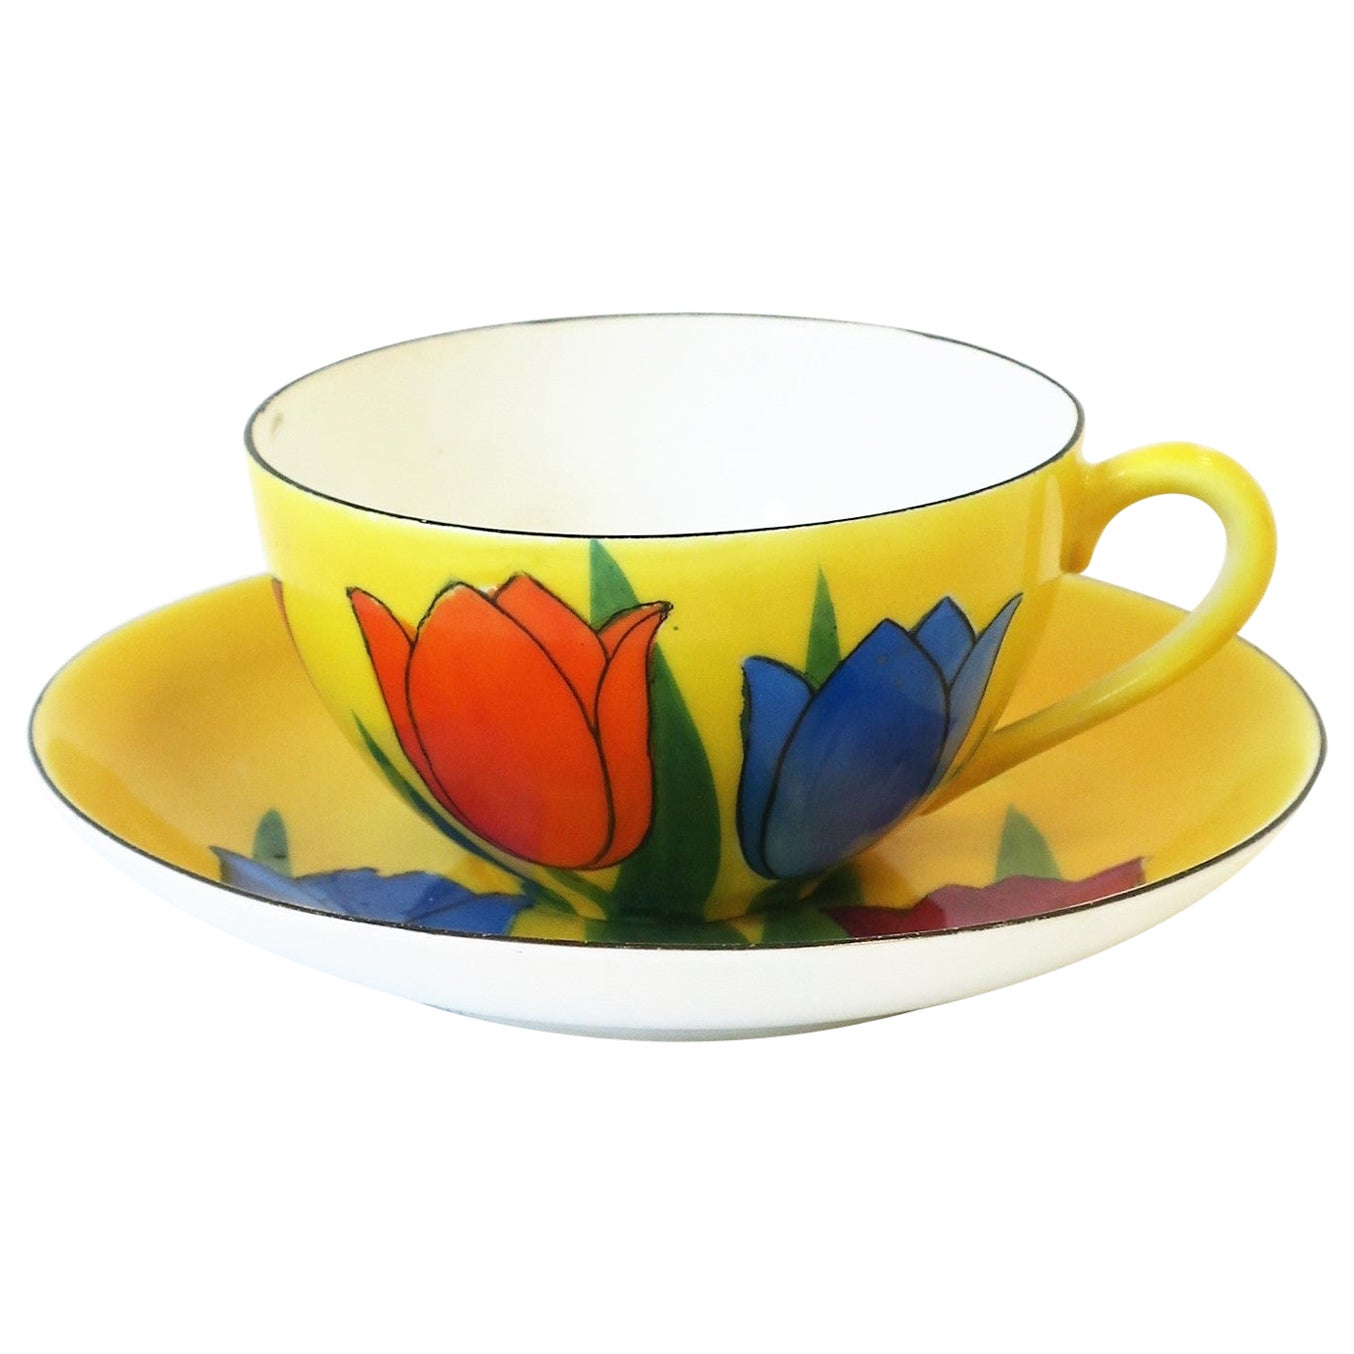 Yellow Porcelain Coffee or Tea Cup Saucer Set with Tulip Flowers